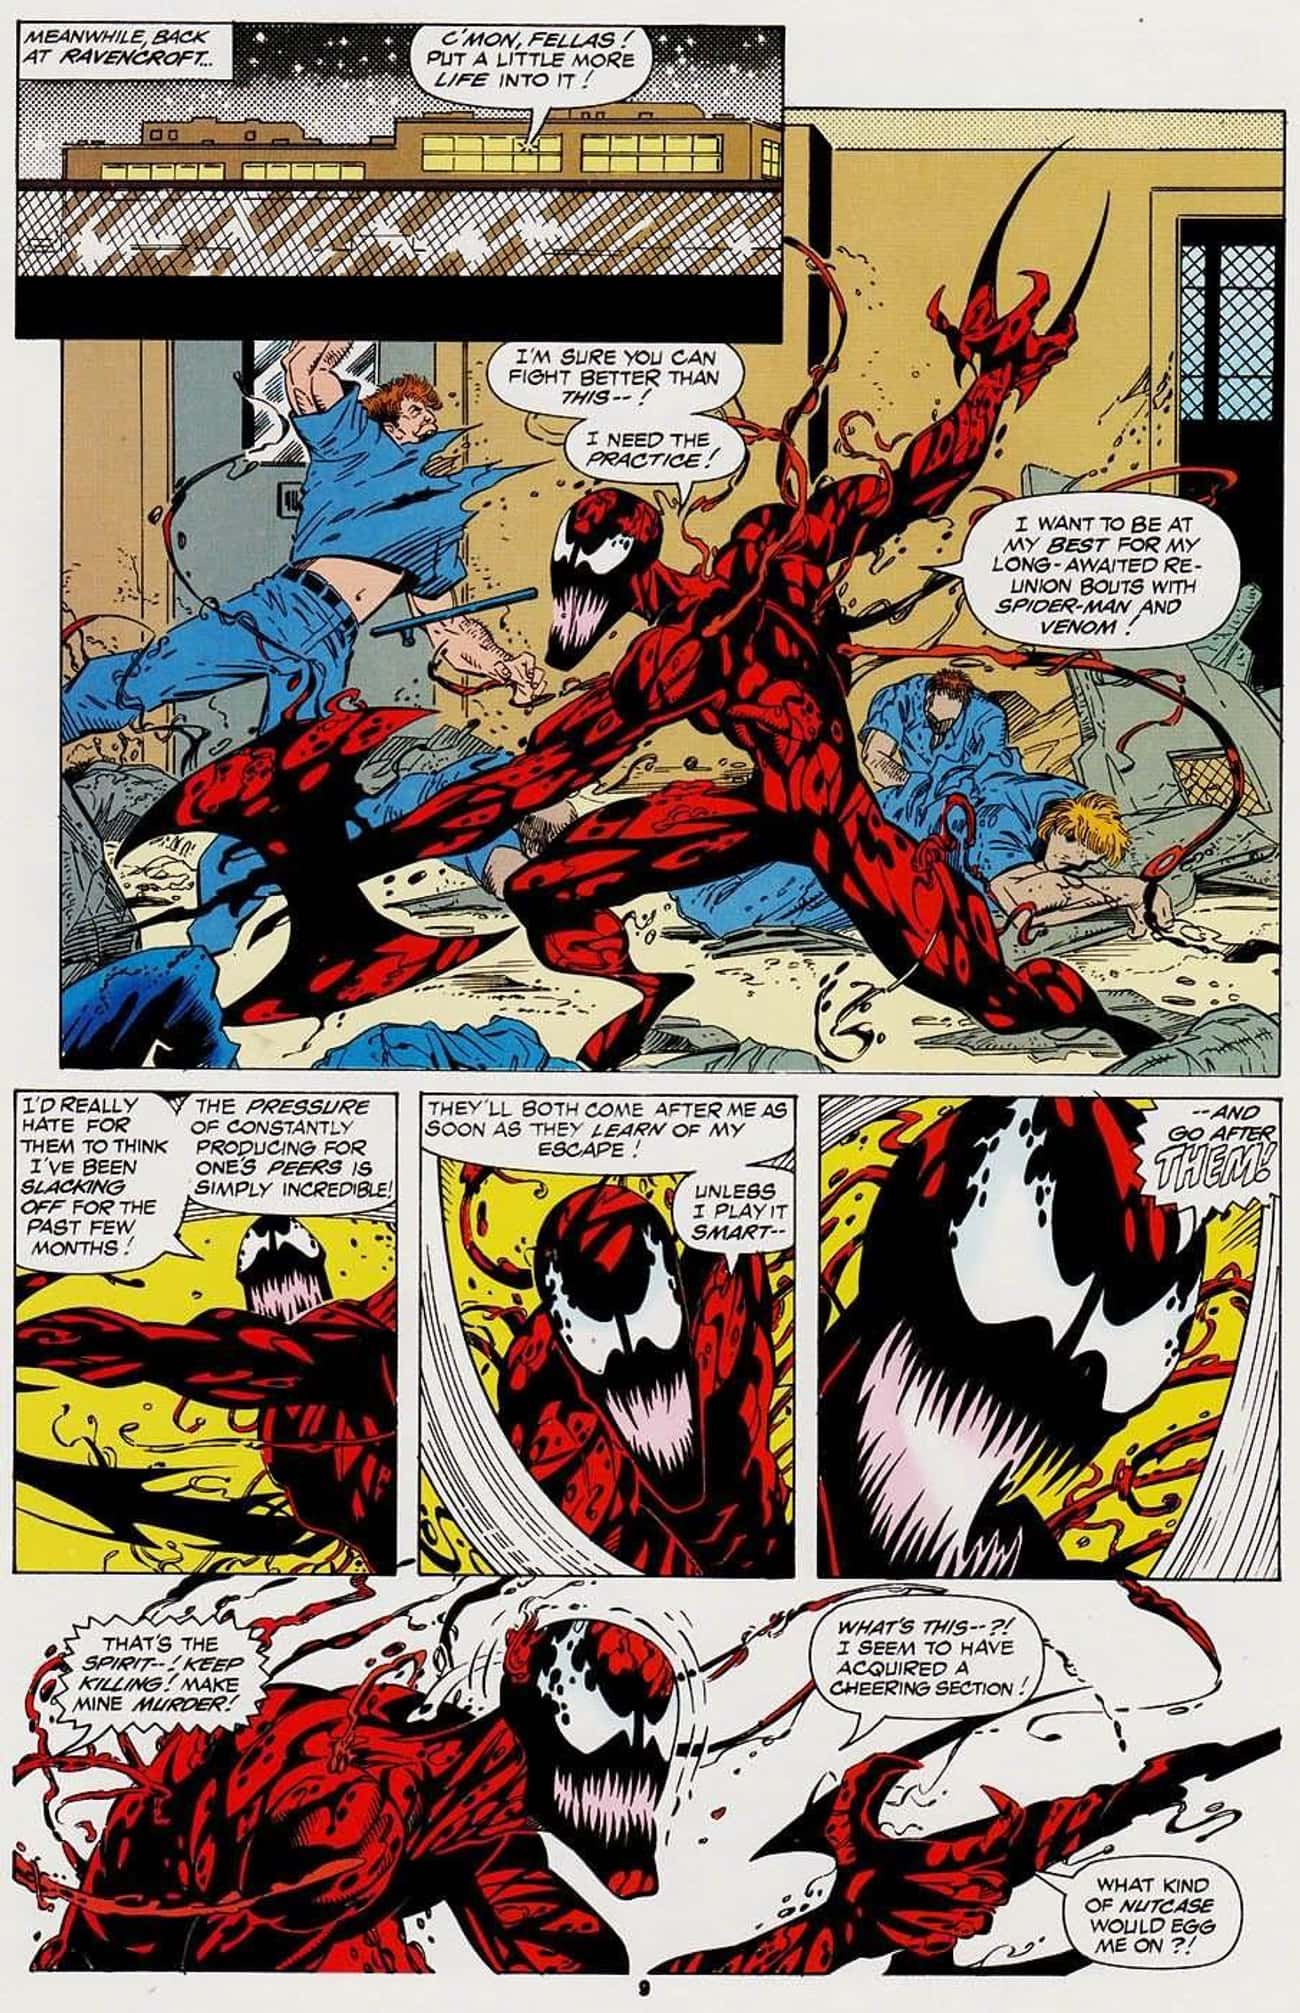 Carnage Goes On A Homicidal Rampage To Attract Spider-Man And Venom